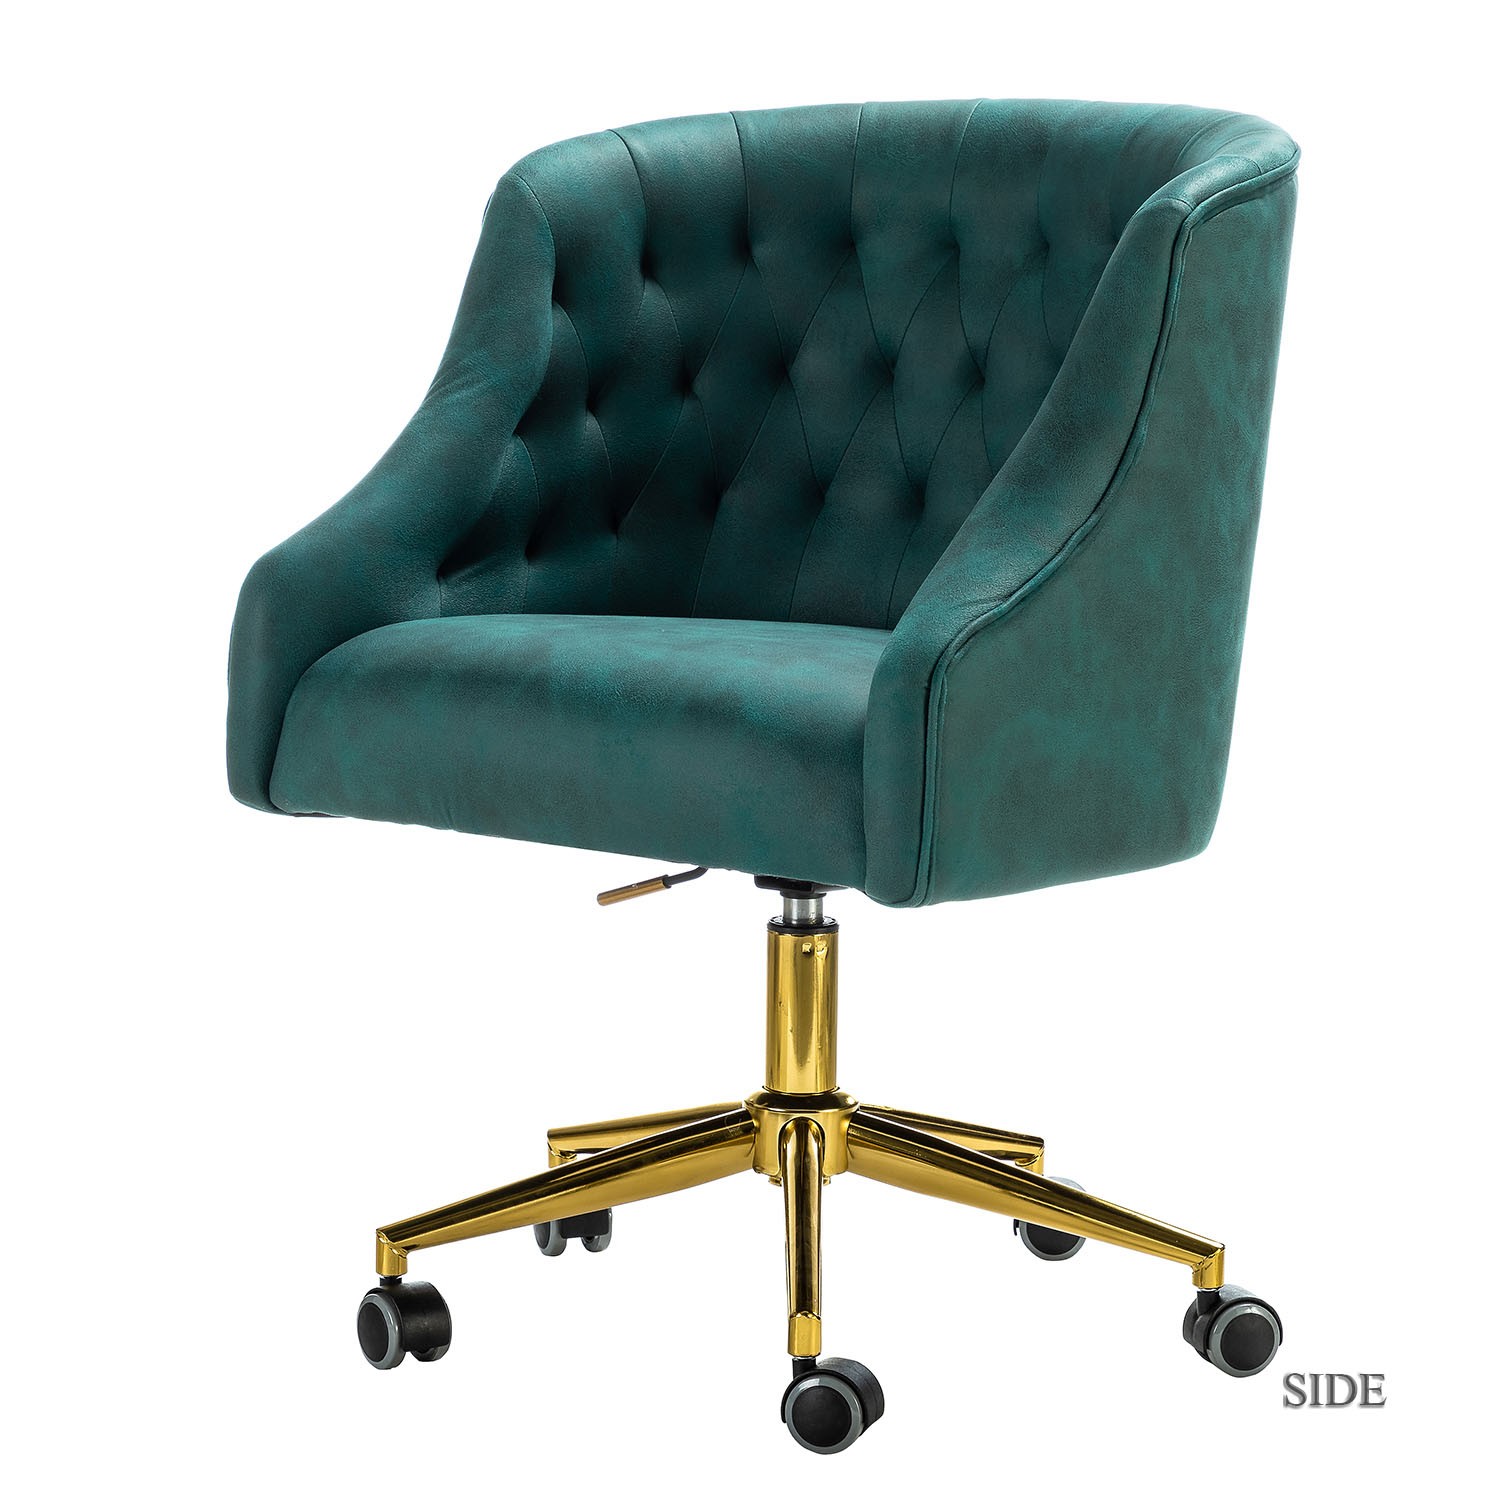 Gorgeous Tufted Green and Gold Faux Leather Office Chair